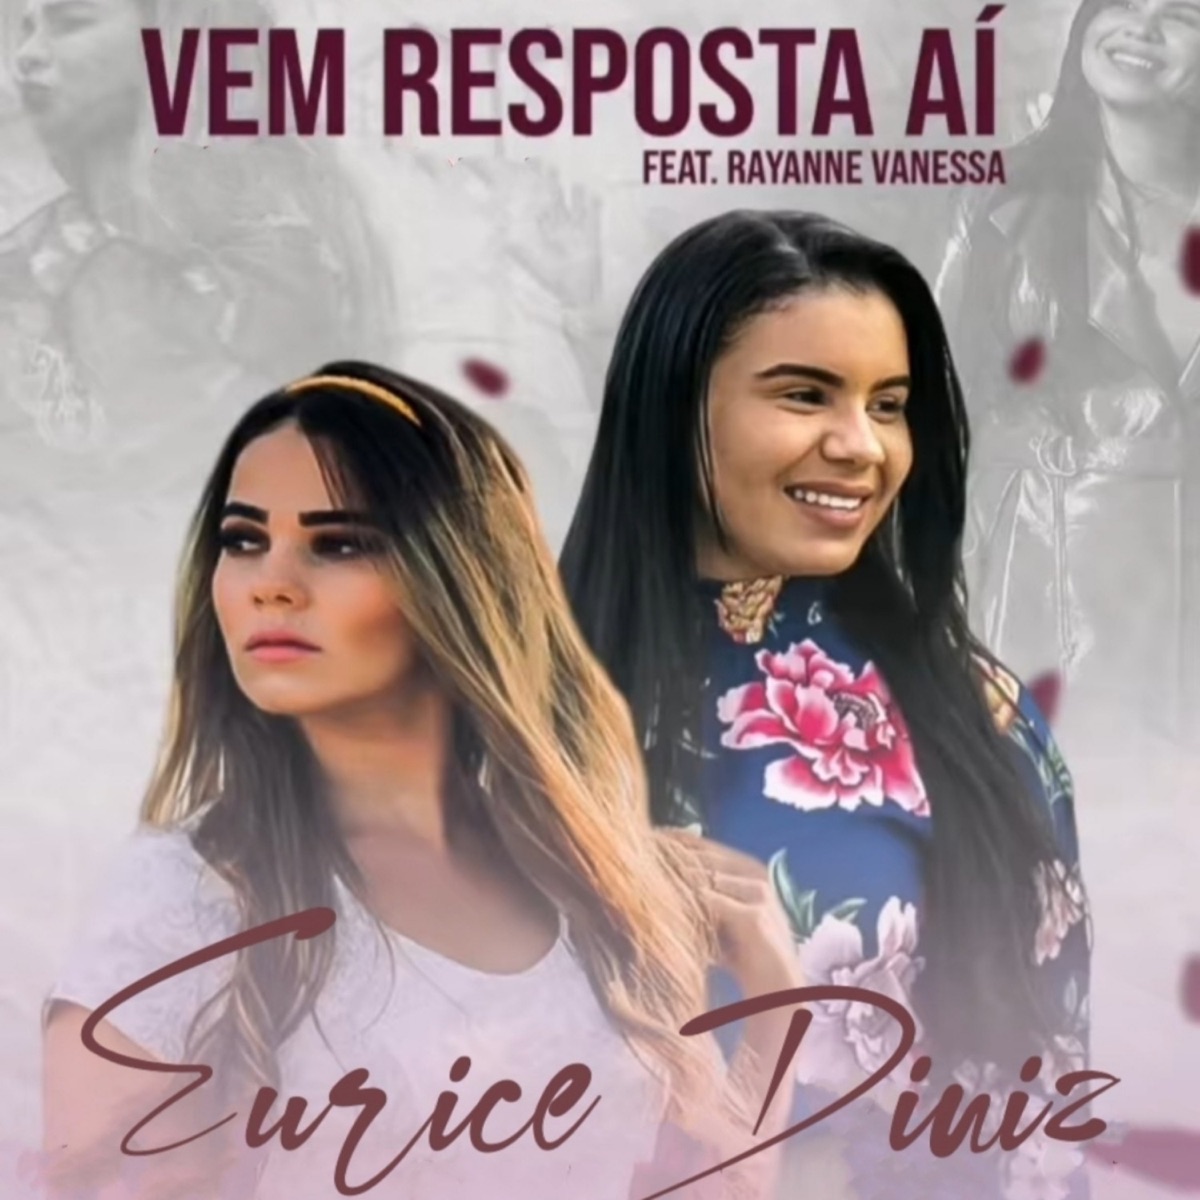 Fica Tranquilo - Song by Kemilly Santos - Apple Music